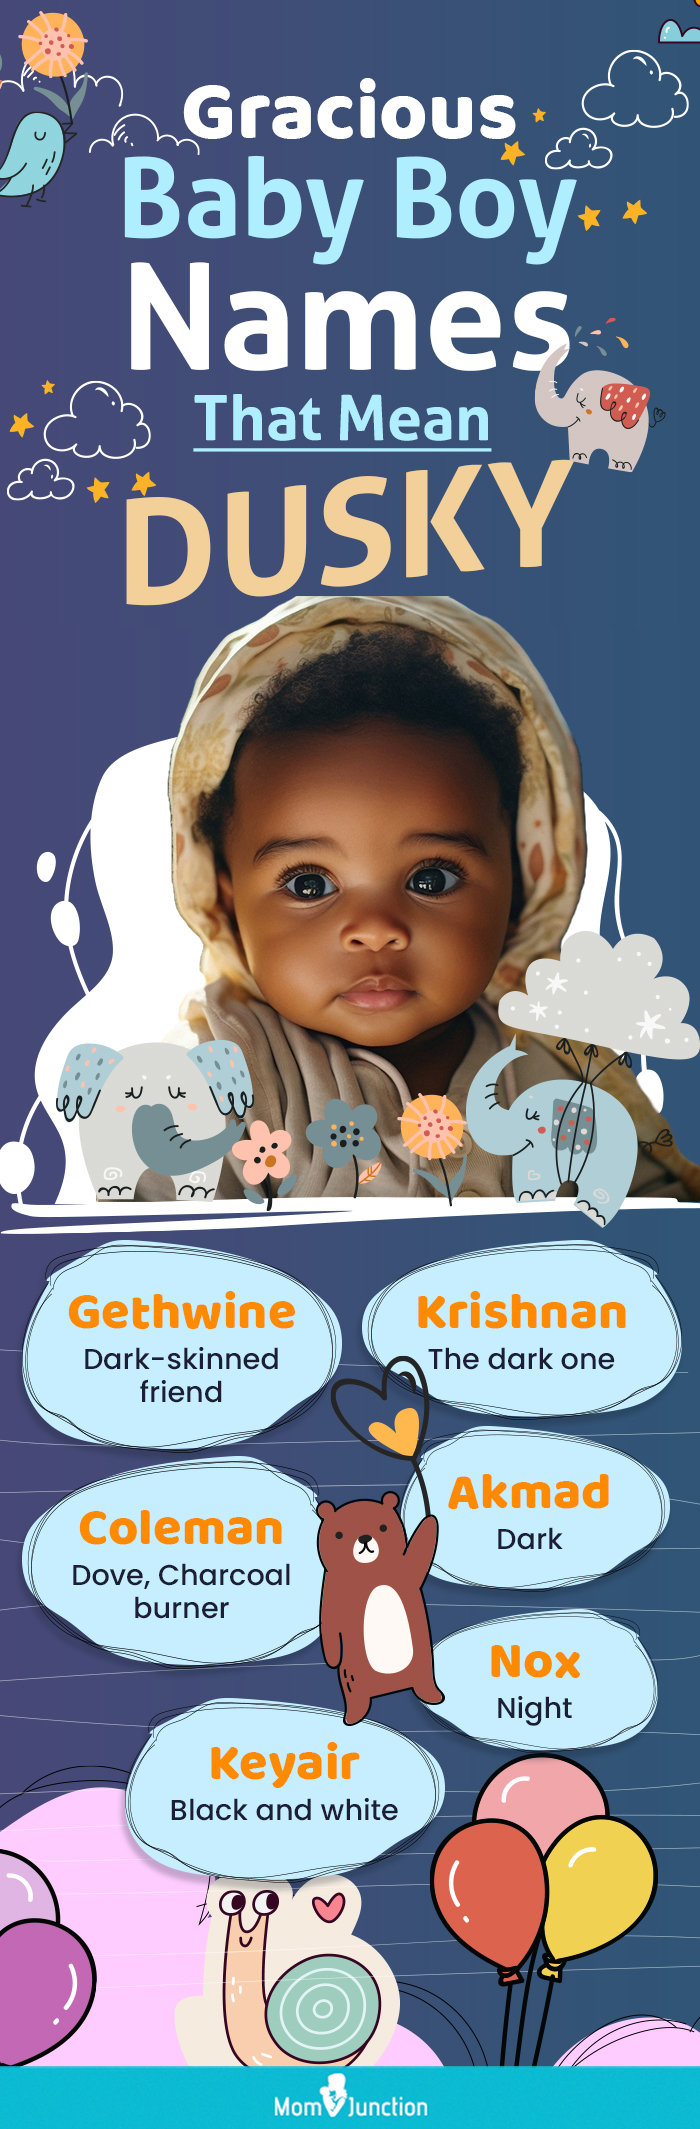 gracious baby boy names that mean dusky(infographic)